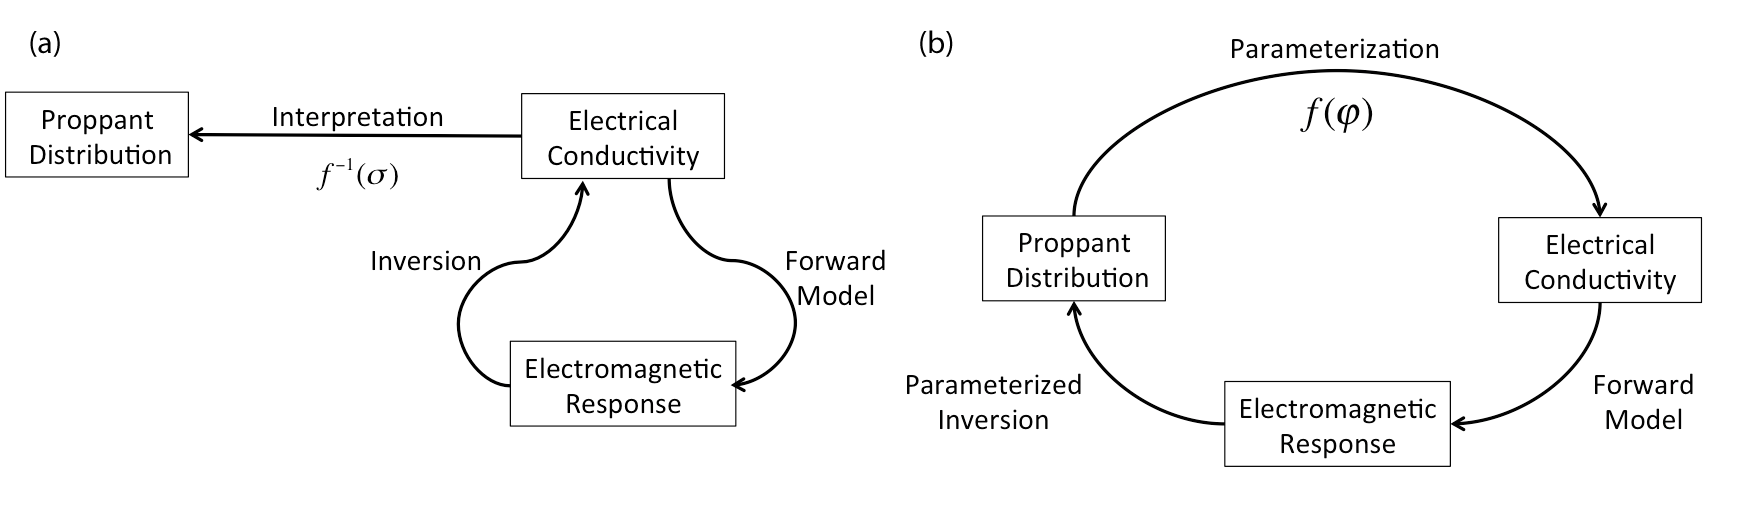 (a) Traditional approach to inversion, where the model space, electrical conductivity, is mapped to data space, the electromagnetic response, through a forward model. The inversion then provides a method by which we estimate a model that is consistent with the observed data. The recovered conductivity model is then used to infer information about the reservoir properties of interest, in this case, the distribution of proppant. (b) Parametrized inversion, where we parametrize the model space, electrical conductivity, in terms of the property of interest, the distribution of proppant. By defining such a parametrization, the inversion can provide a means of estimating the properties of interest directly from the data.